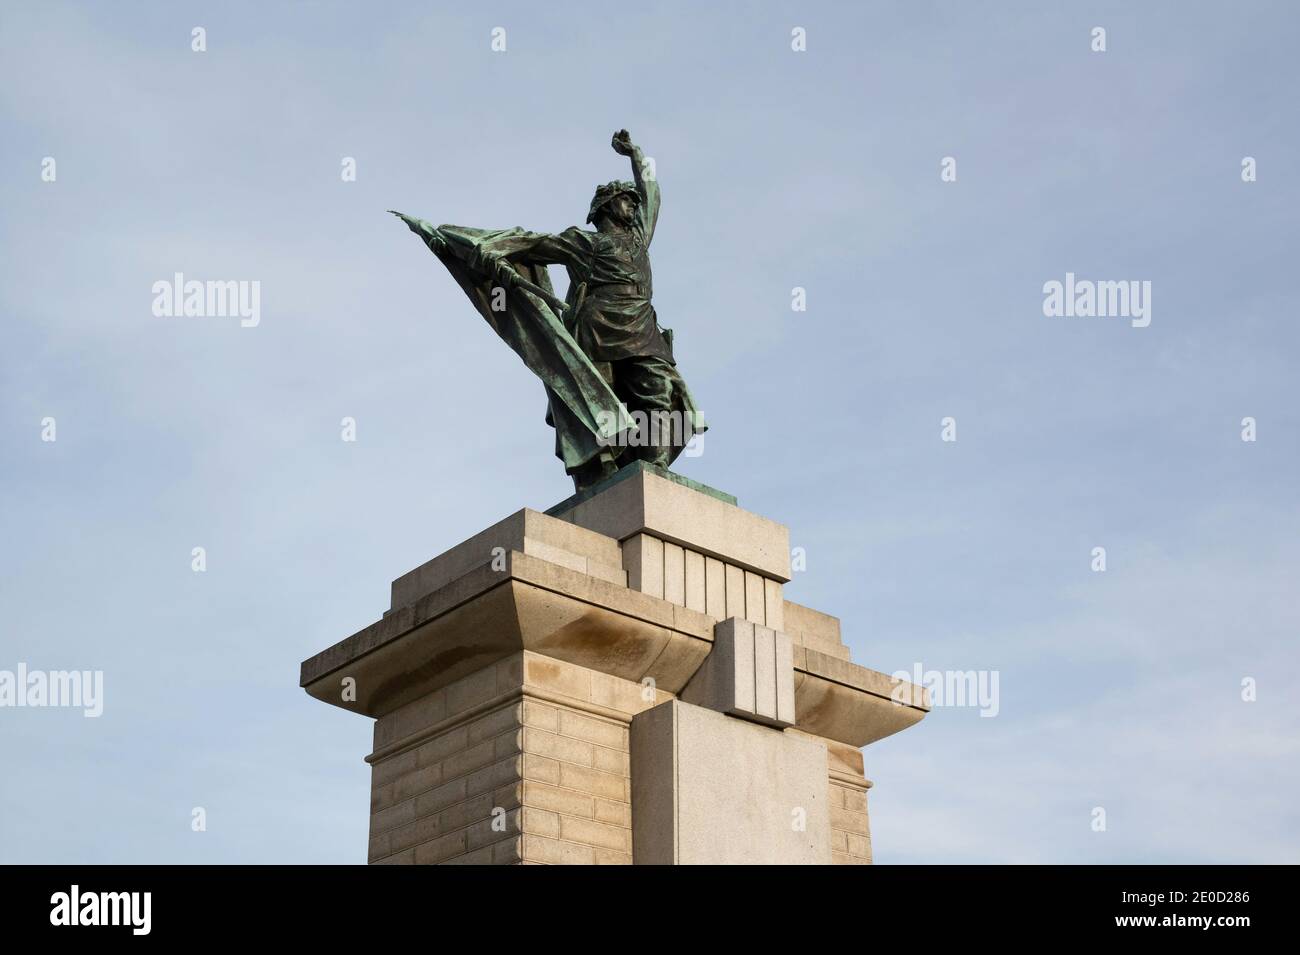 Liberation memorial, Brno, Czech Republic / Czechia - war memorial - statue and sculpture of Red army soldier and combatant. Heorism and heoric pose. Stock Photo